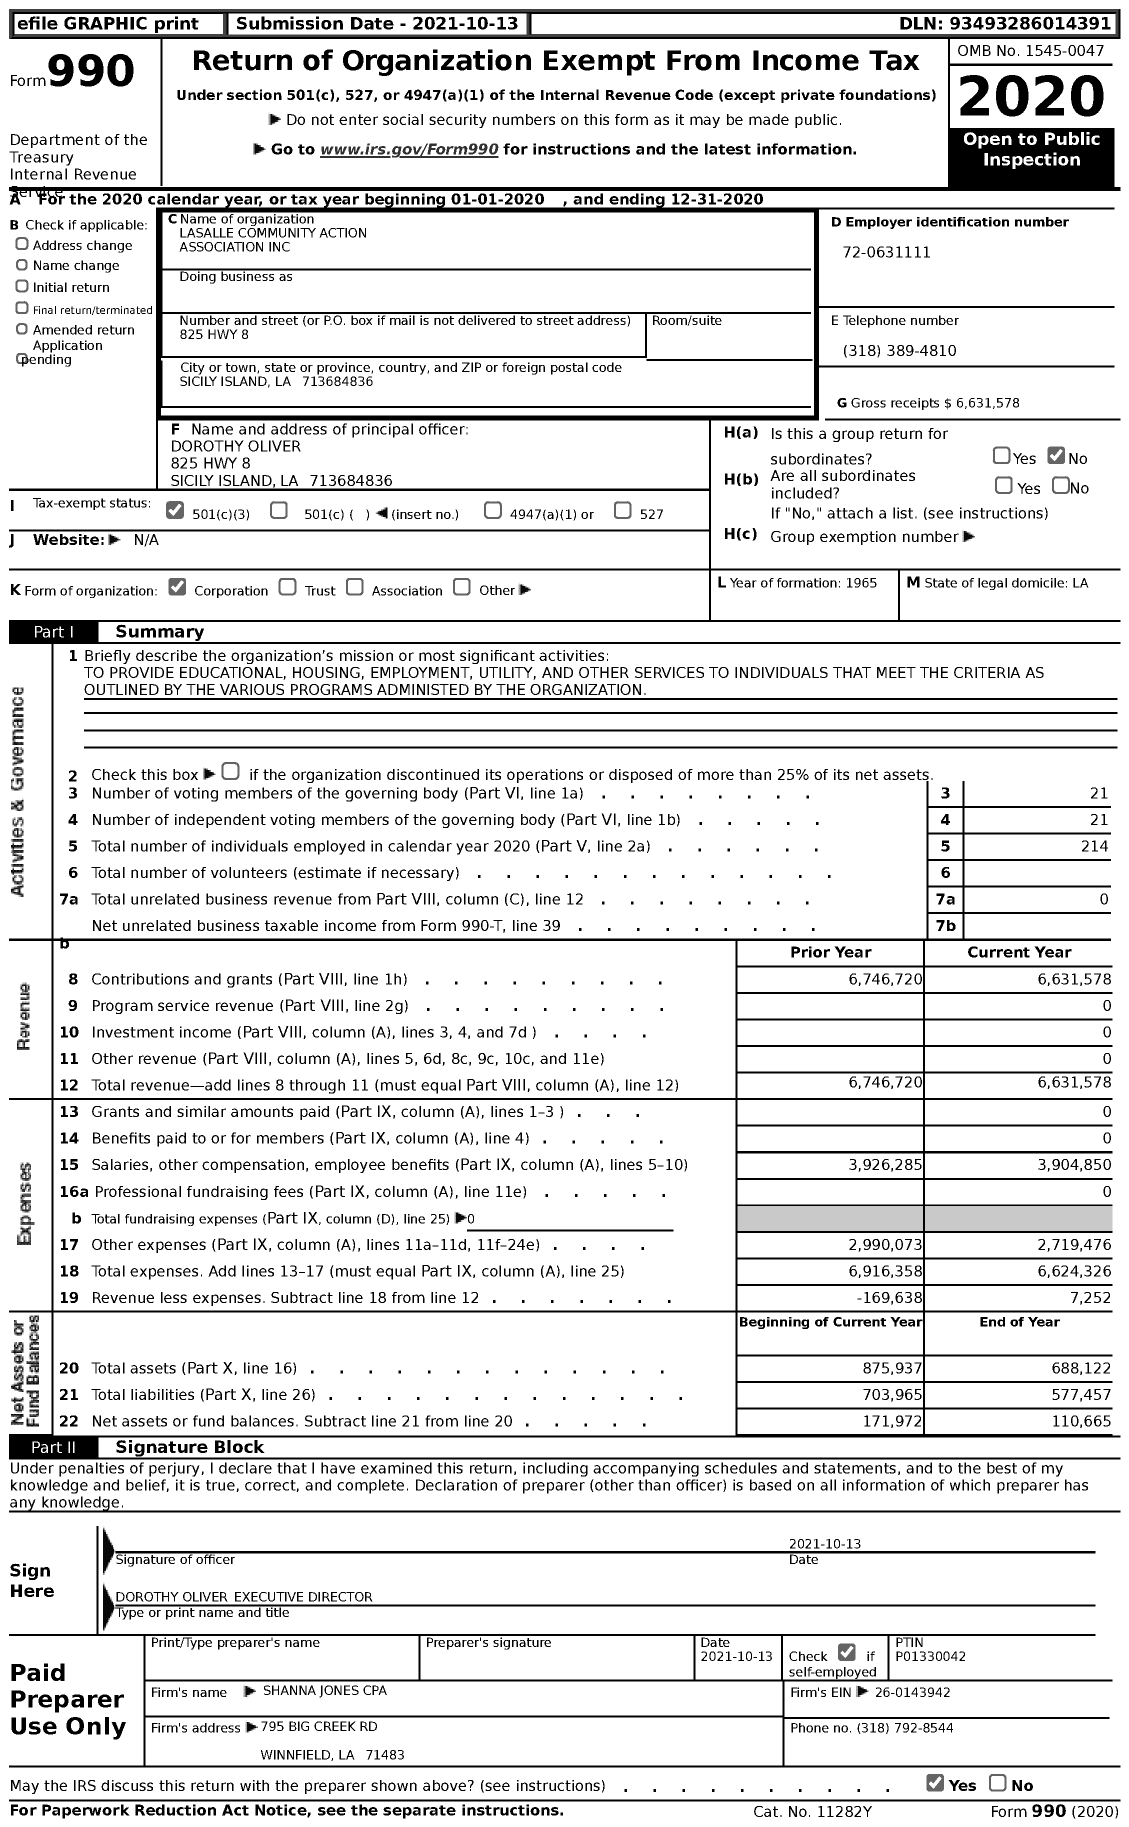 Image of first page of 2020 Form 990 for La Salle Community Action Association (LSCAA)